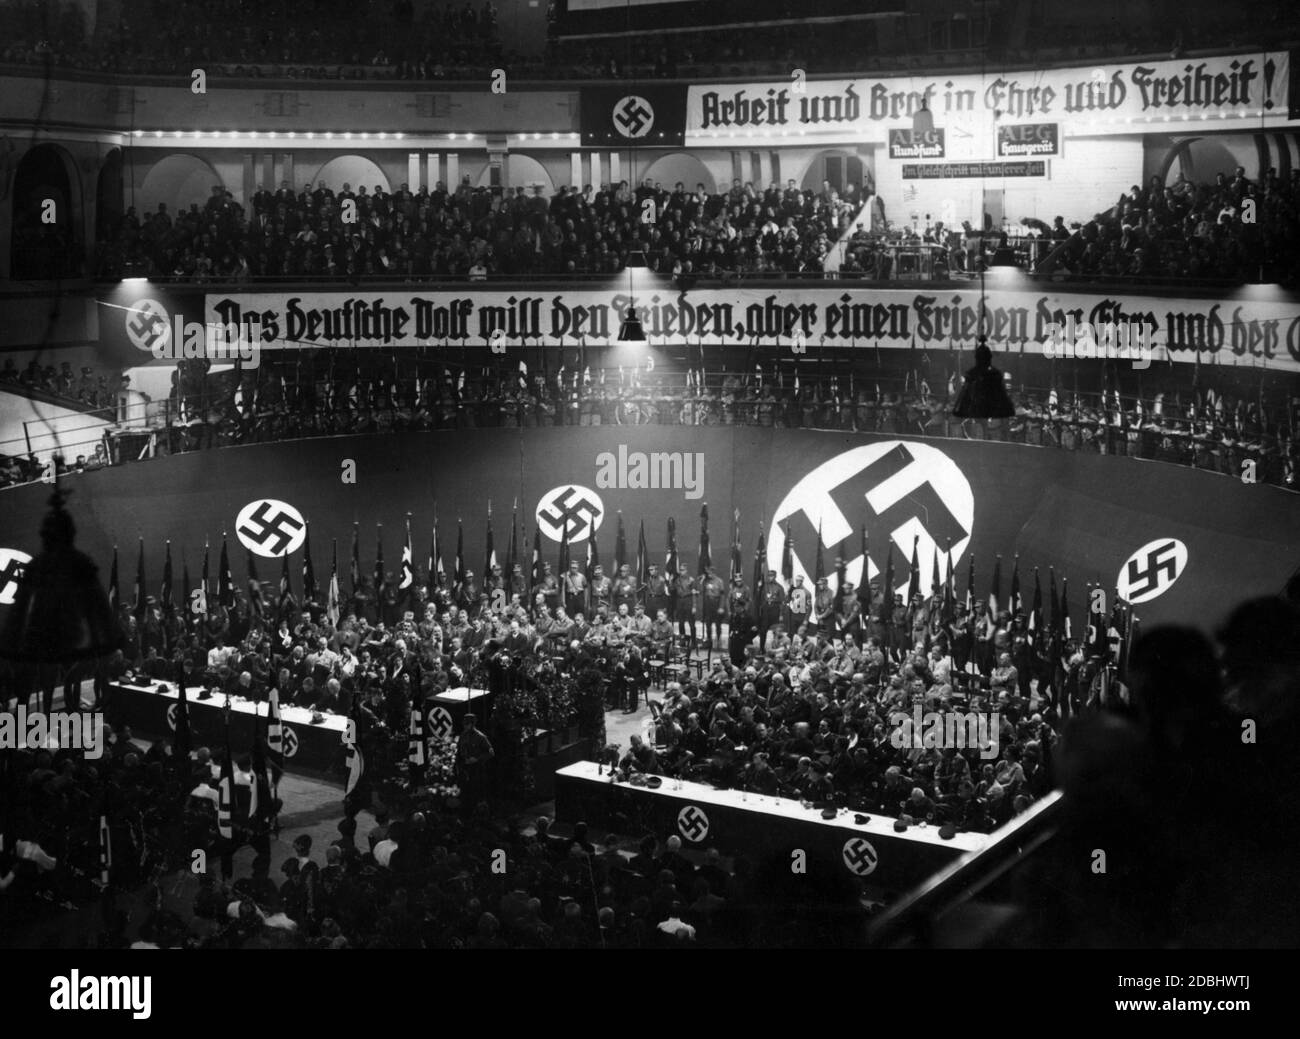 'Propaganda banners during an event of the NSDAP. ''Arbeit und Brot in Ehre und Freiheit'' (Work and bread in honor and freedom). Under the banner hangs an advertisement of the company AEG Haushaltgeraet with the slogan ''Im Gleichschritt mit unserer Zeit'' (Marching in step with our time). Underneath it is a banner with the slogan ''Das Deutsche Volk will den Frieden, aber ein Frieden der Ehre und der Gleichberechtigung'' (The German people want peace, but a peace of honour and equality).' Stock Photo